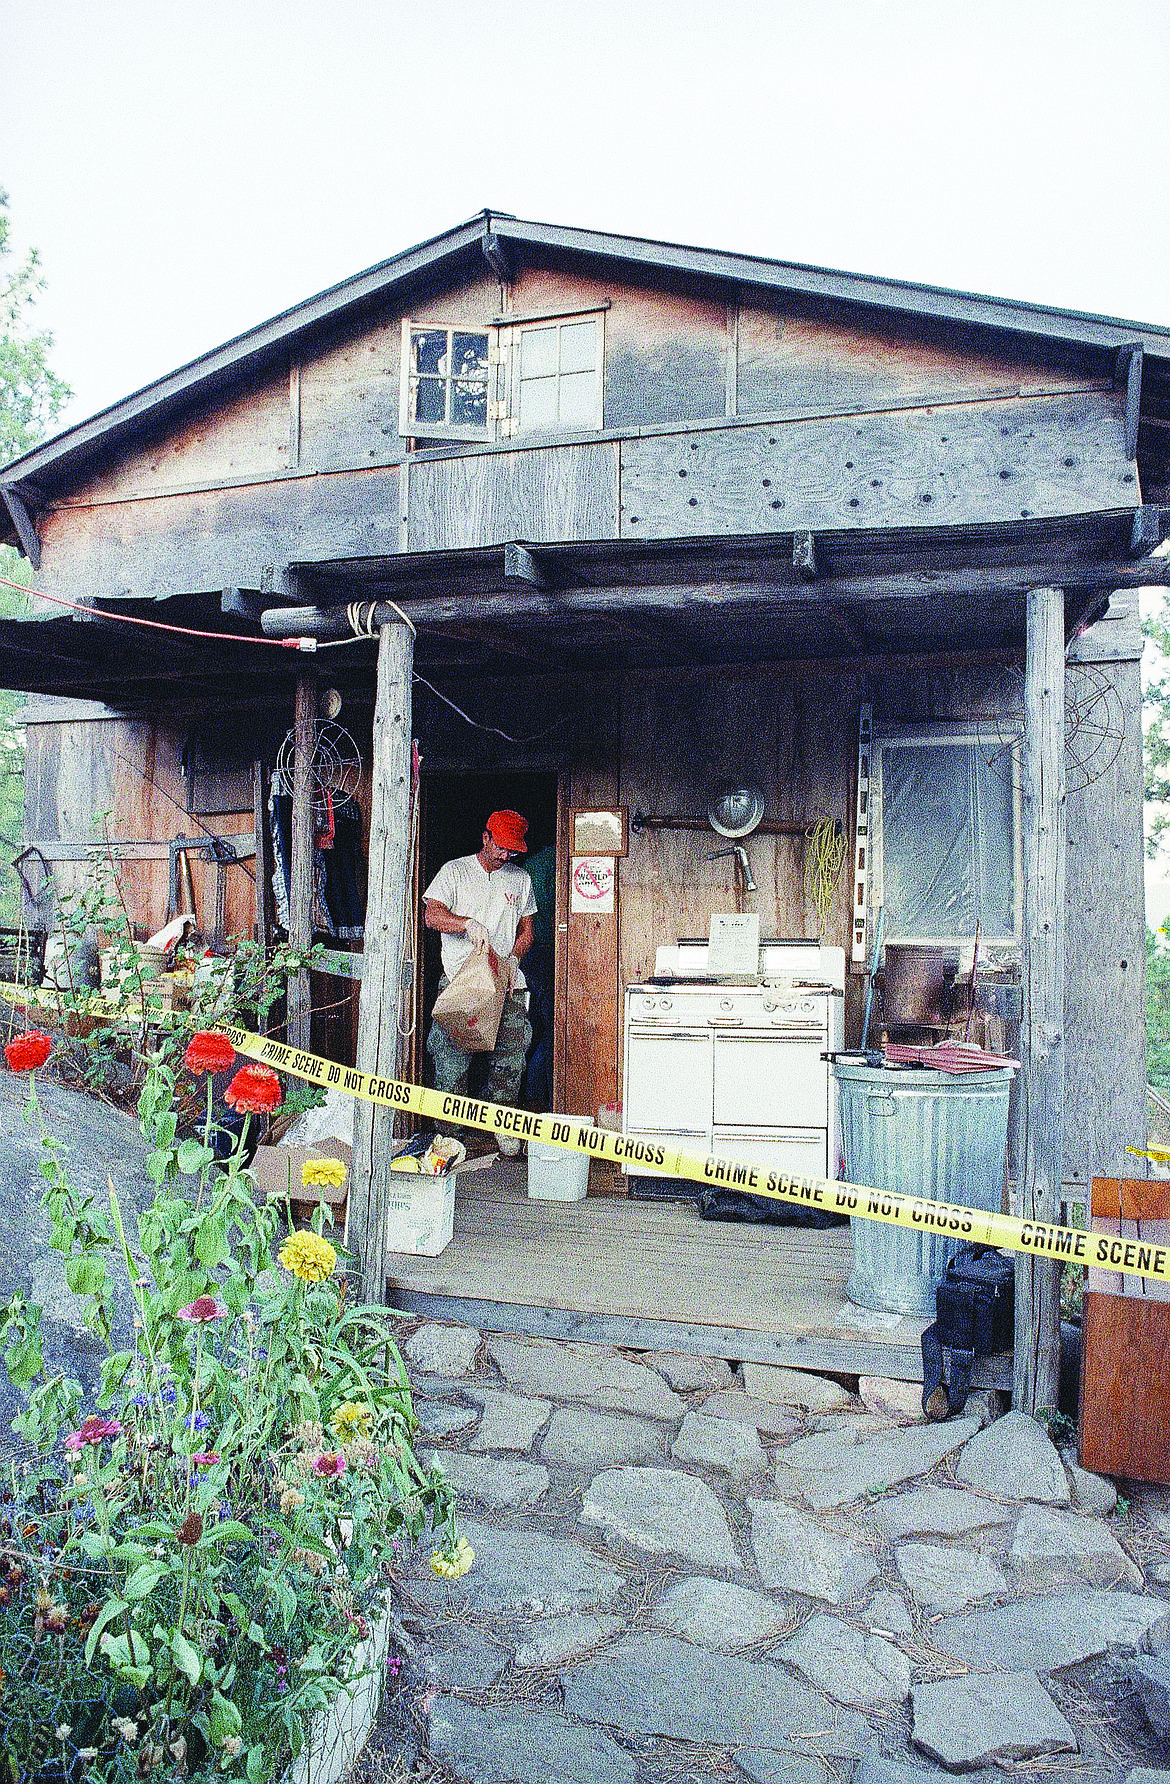 In this Aug. 31, 1992, file photo, federal agents gather evidence from the home of captured fugitive Randy Weaver near Naples, Idaho. It's been a quarter century since a standoff in the remote mountains of northern Idaho left a 14-year-old boy, his mother and a federal agent dead and sparked the expansion of radical right-wing groups across the country that continues to this day.